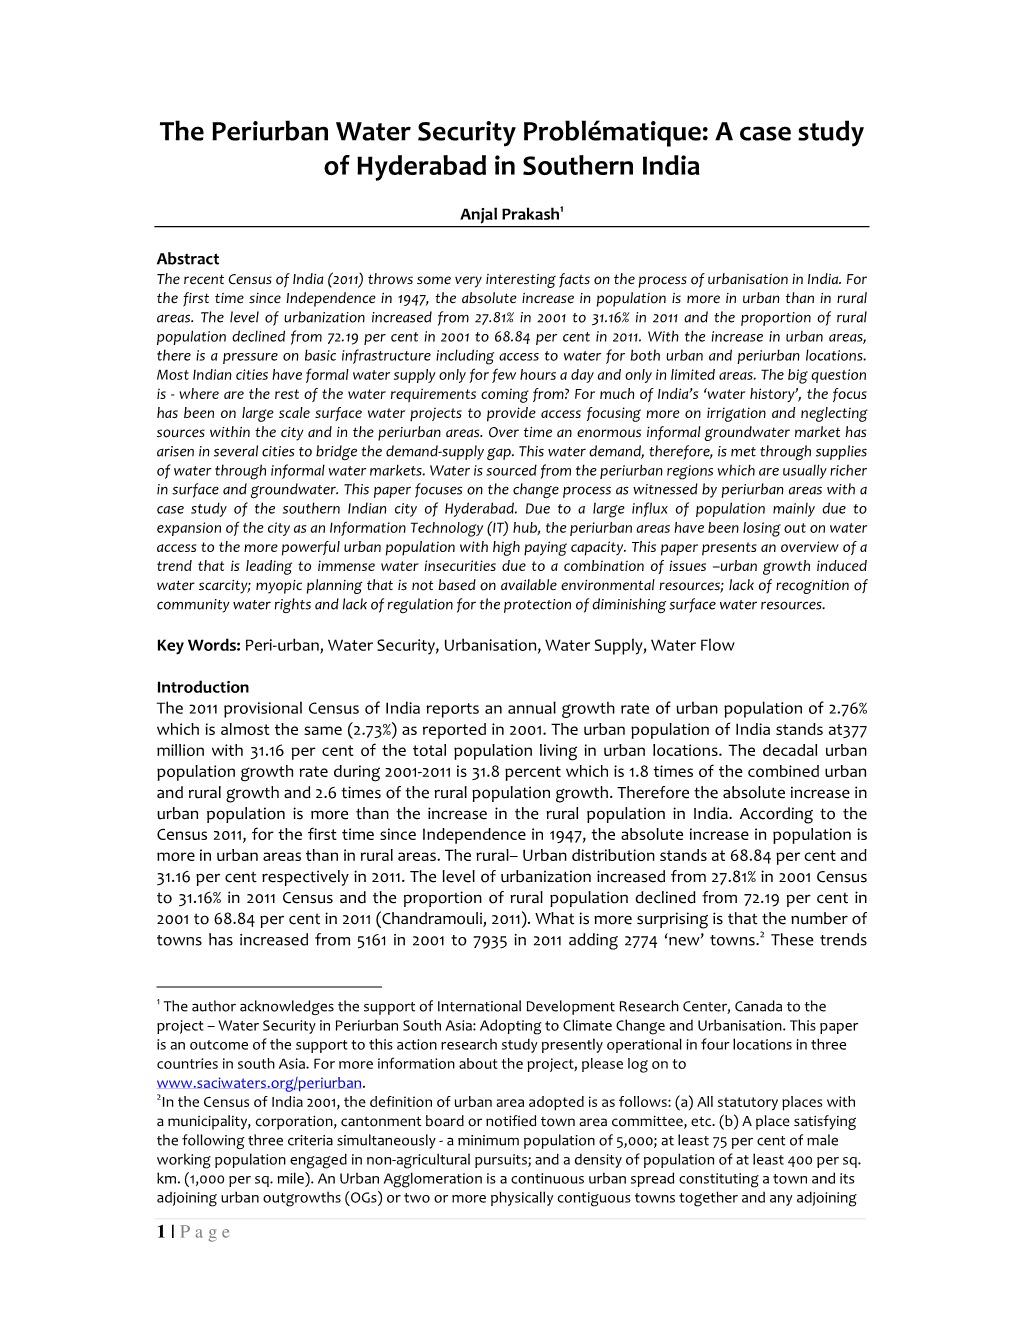 The Periurban Water Security Problématique: a Case Study of Hyderabad in Southern India